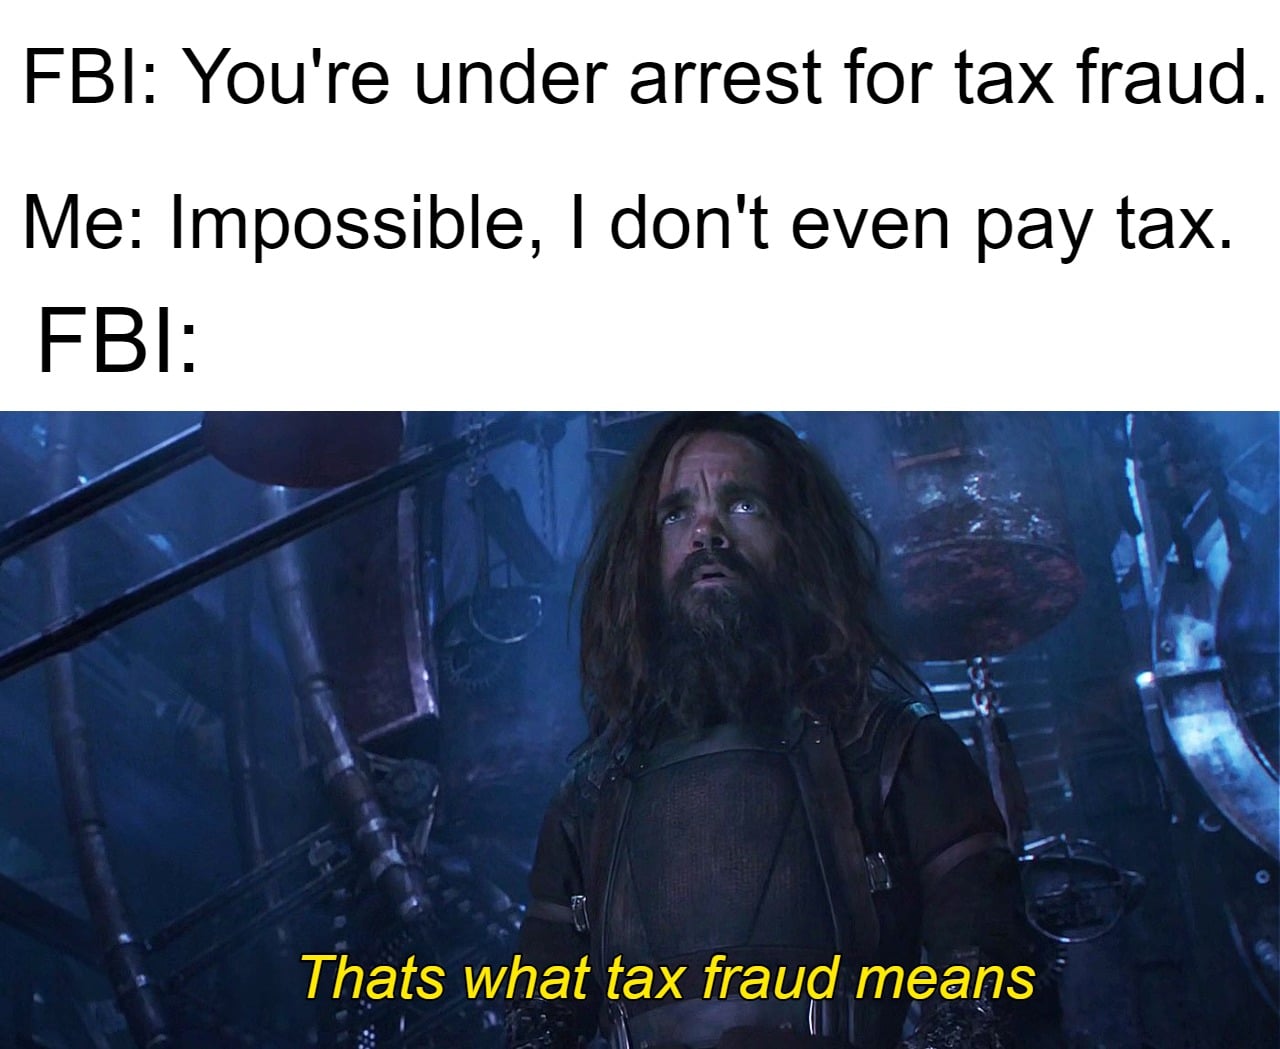 Dank, Capone Dank Memes Dank, Capone text: FBI: You're under arrest for tax fraud. Me: Impossible, I don't even pay tax. FBI: Thats what tax fraud means 